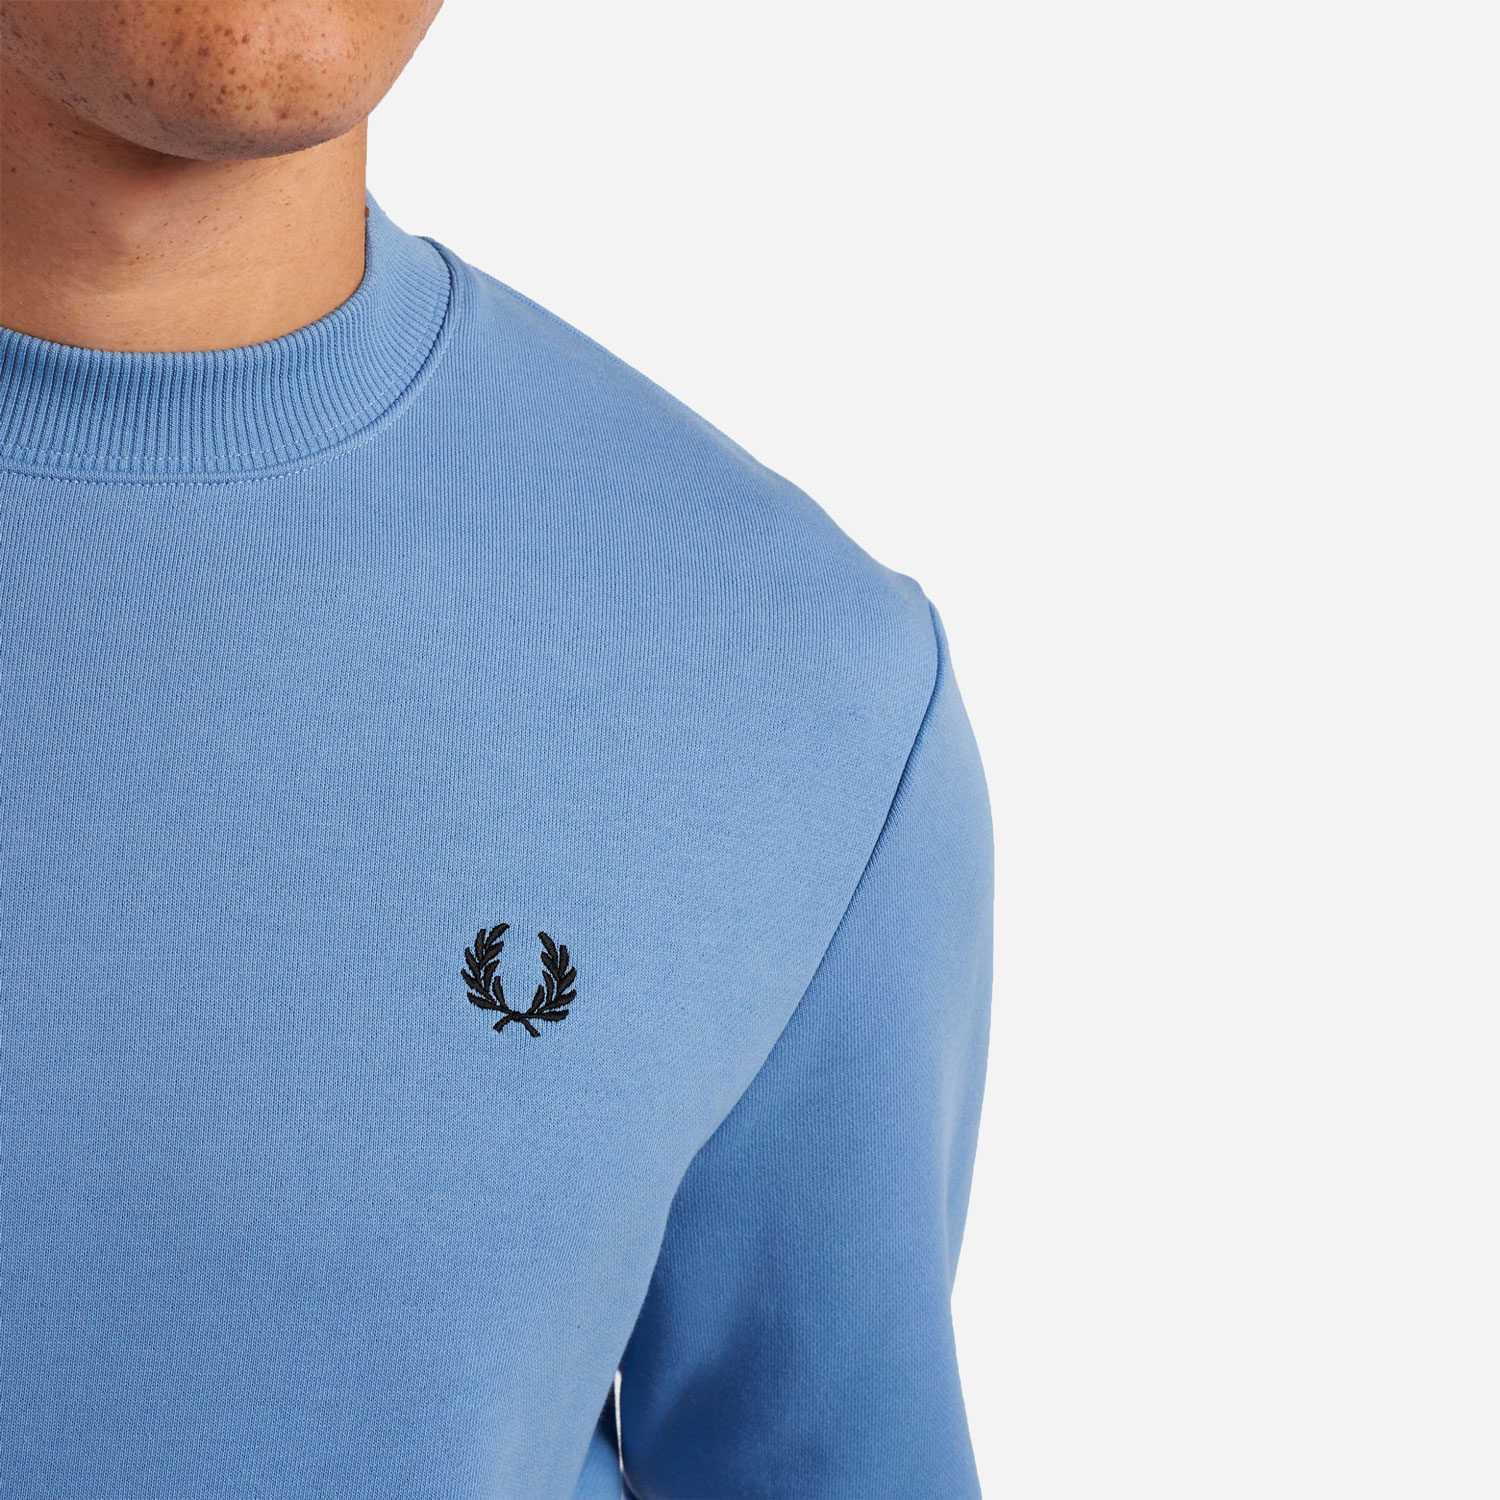 Fred Perry Crew Neck Sweat - Sky